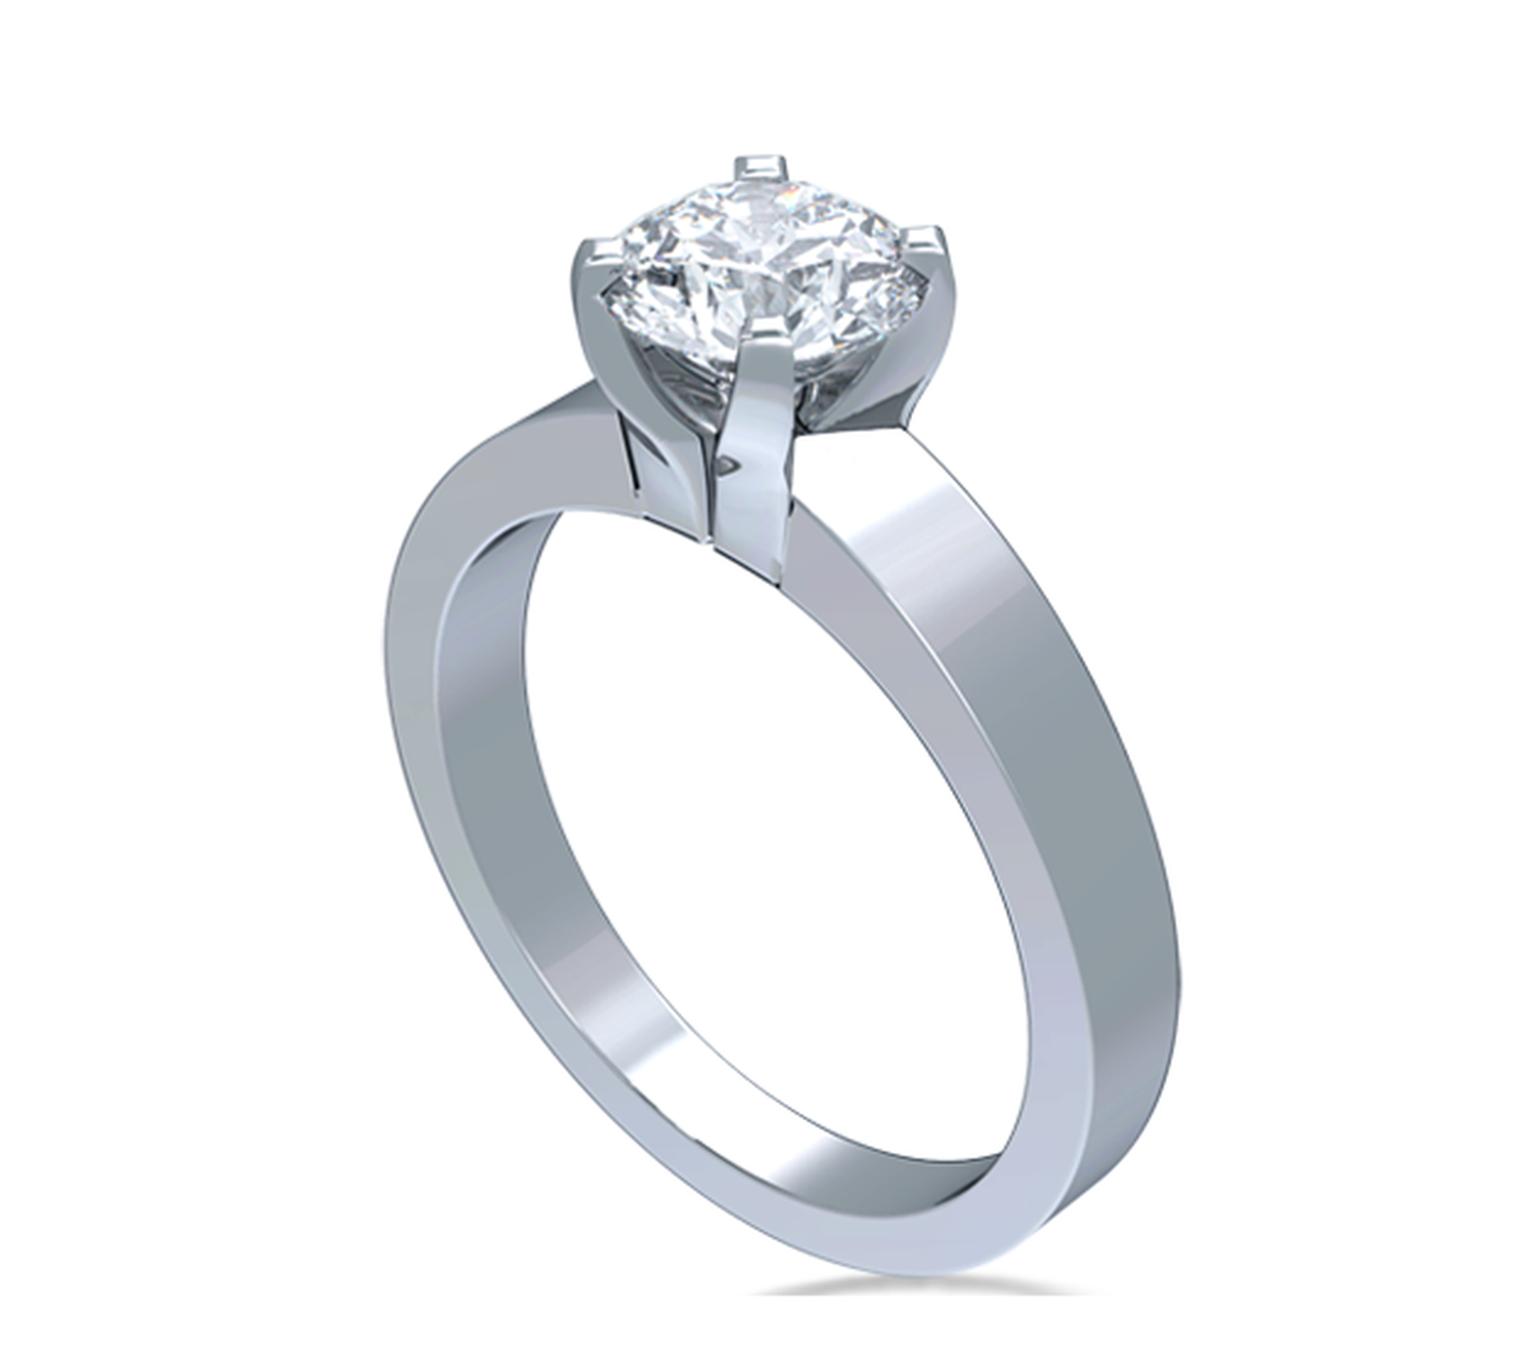 Fair Trade Jewellery Company Star-Sign Solitaire diamond engagement ring in Fairtrade white gold, set with a fully traceable 1.00ct Canadian diamond, viewed side on ($11,995).